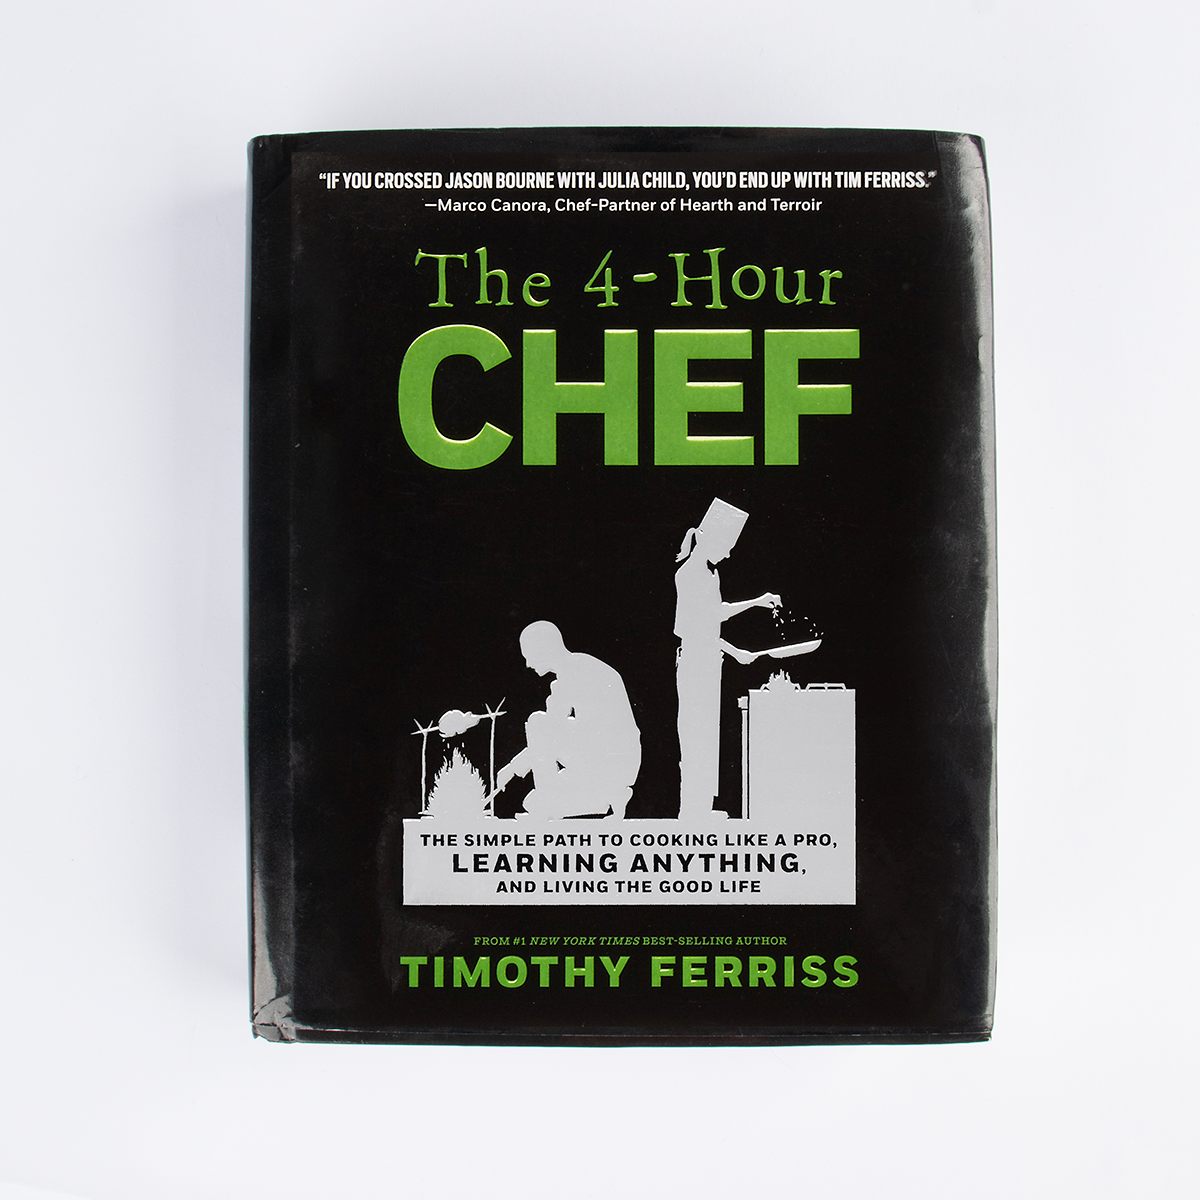 The 4-Hour Chef : The Simple Path to Cooking Like a Pro, Learning Anything, and Living the Good Life